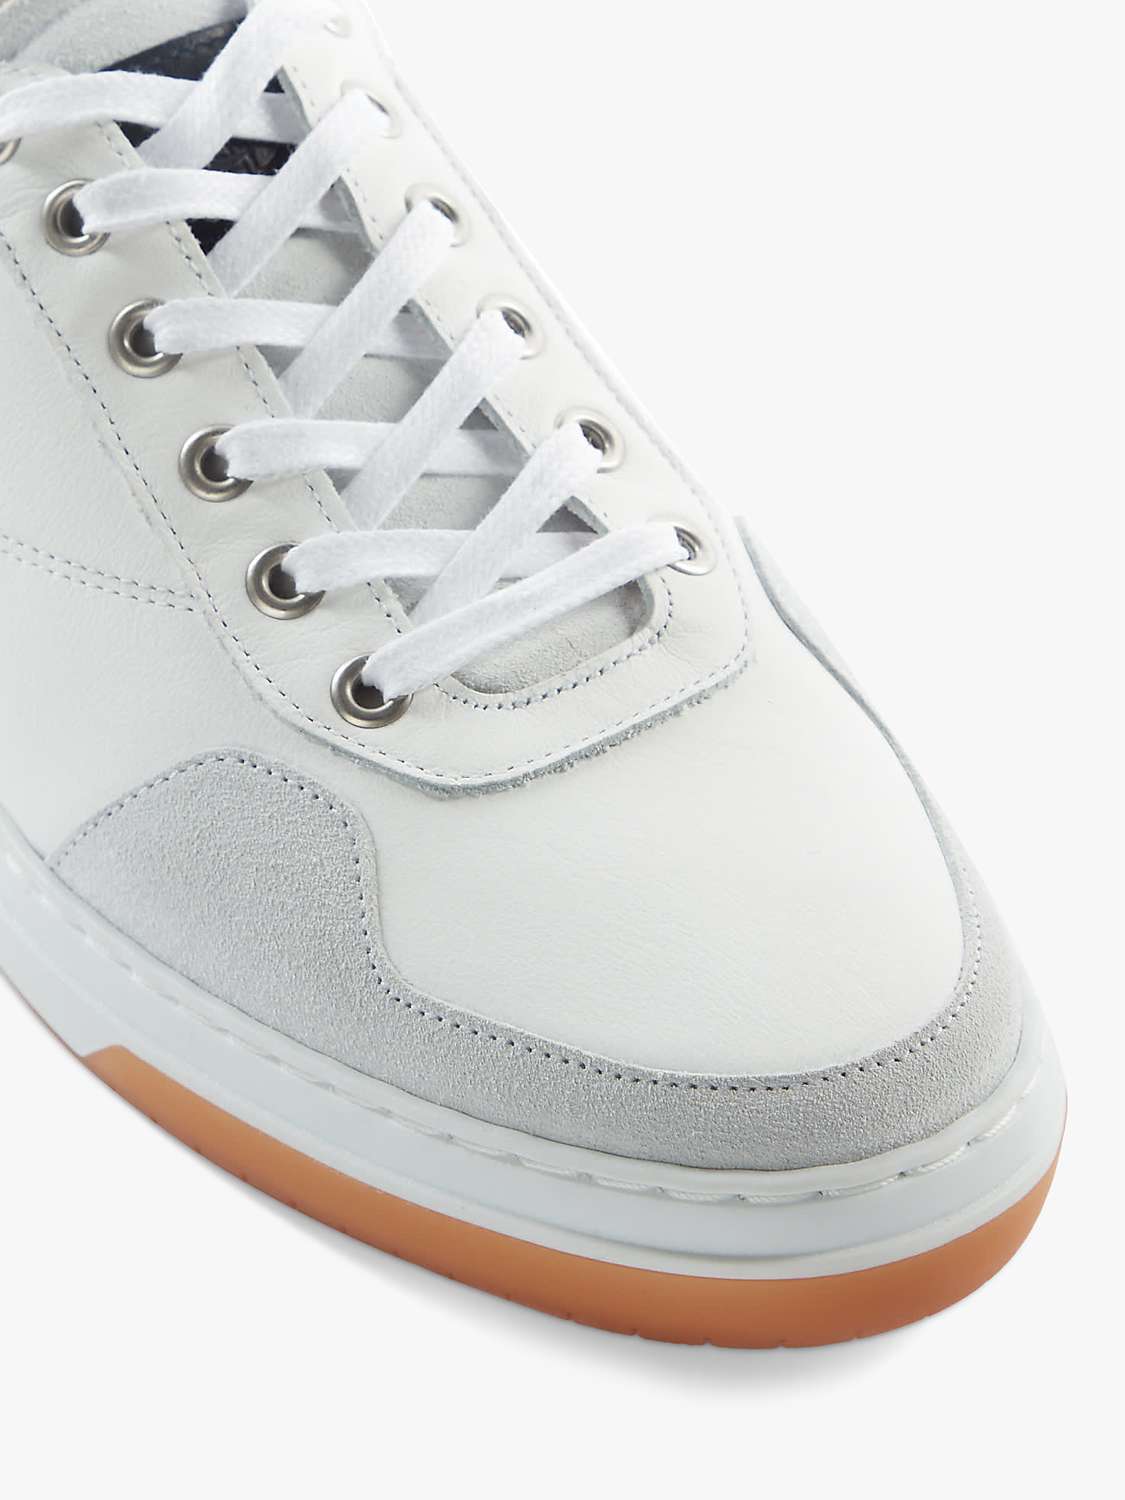 Buy Dune Thorin Leather Lace Up Trainers, White Online at johnlewis.com